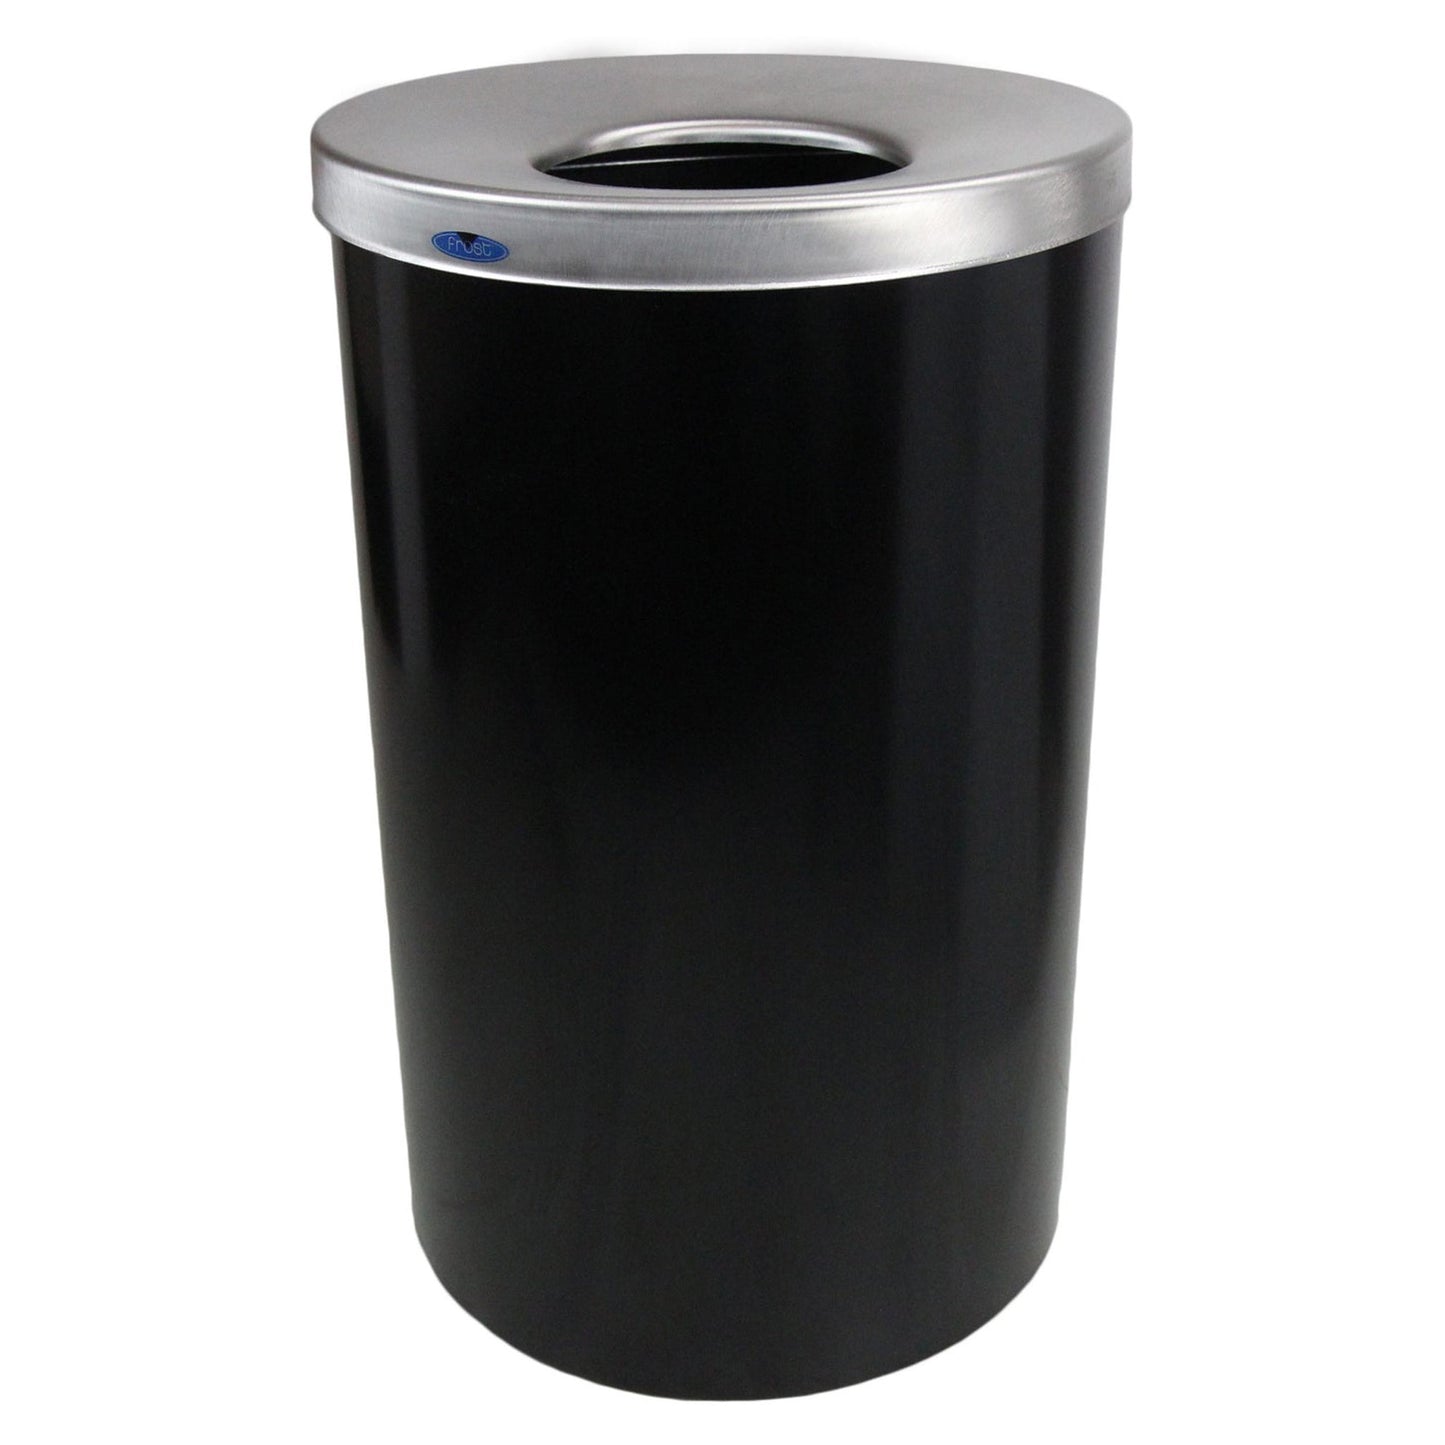 Frost 18.5 x 18.5 x 29.4 Black Powder Coated Waste Receptacles